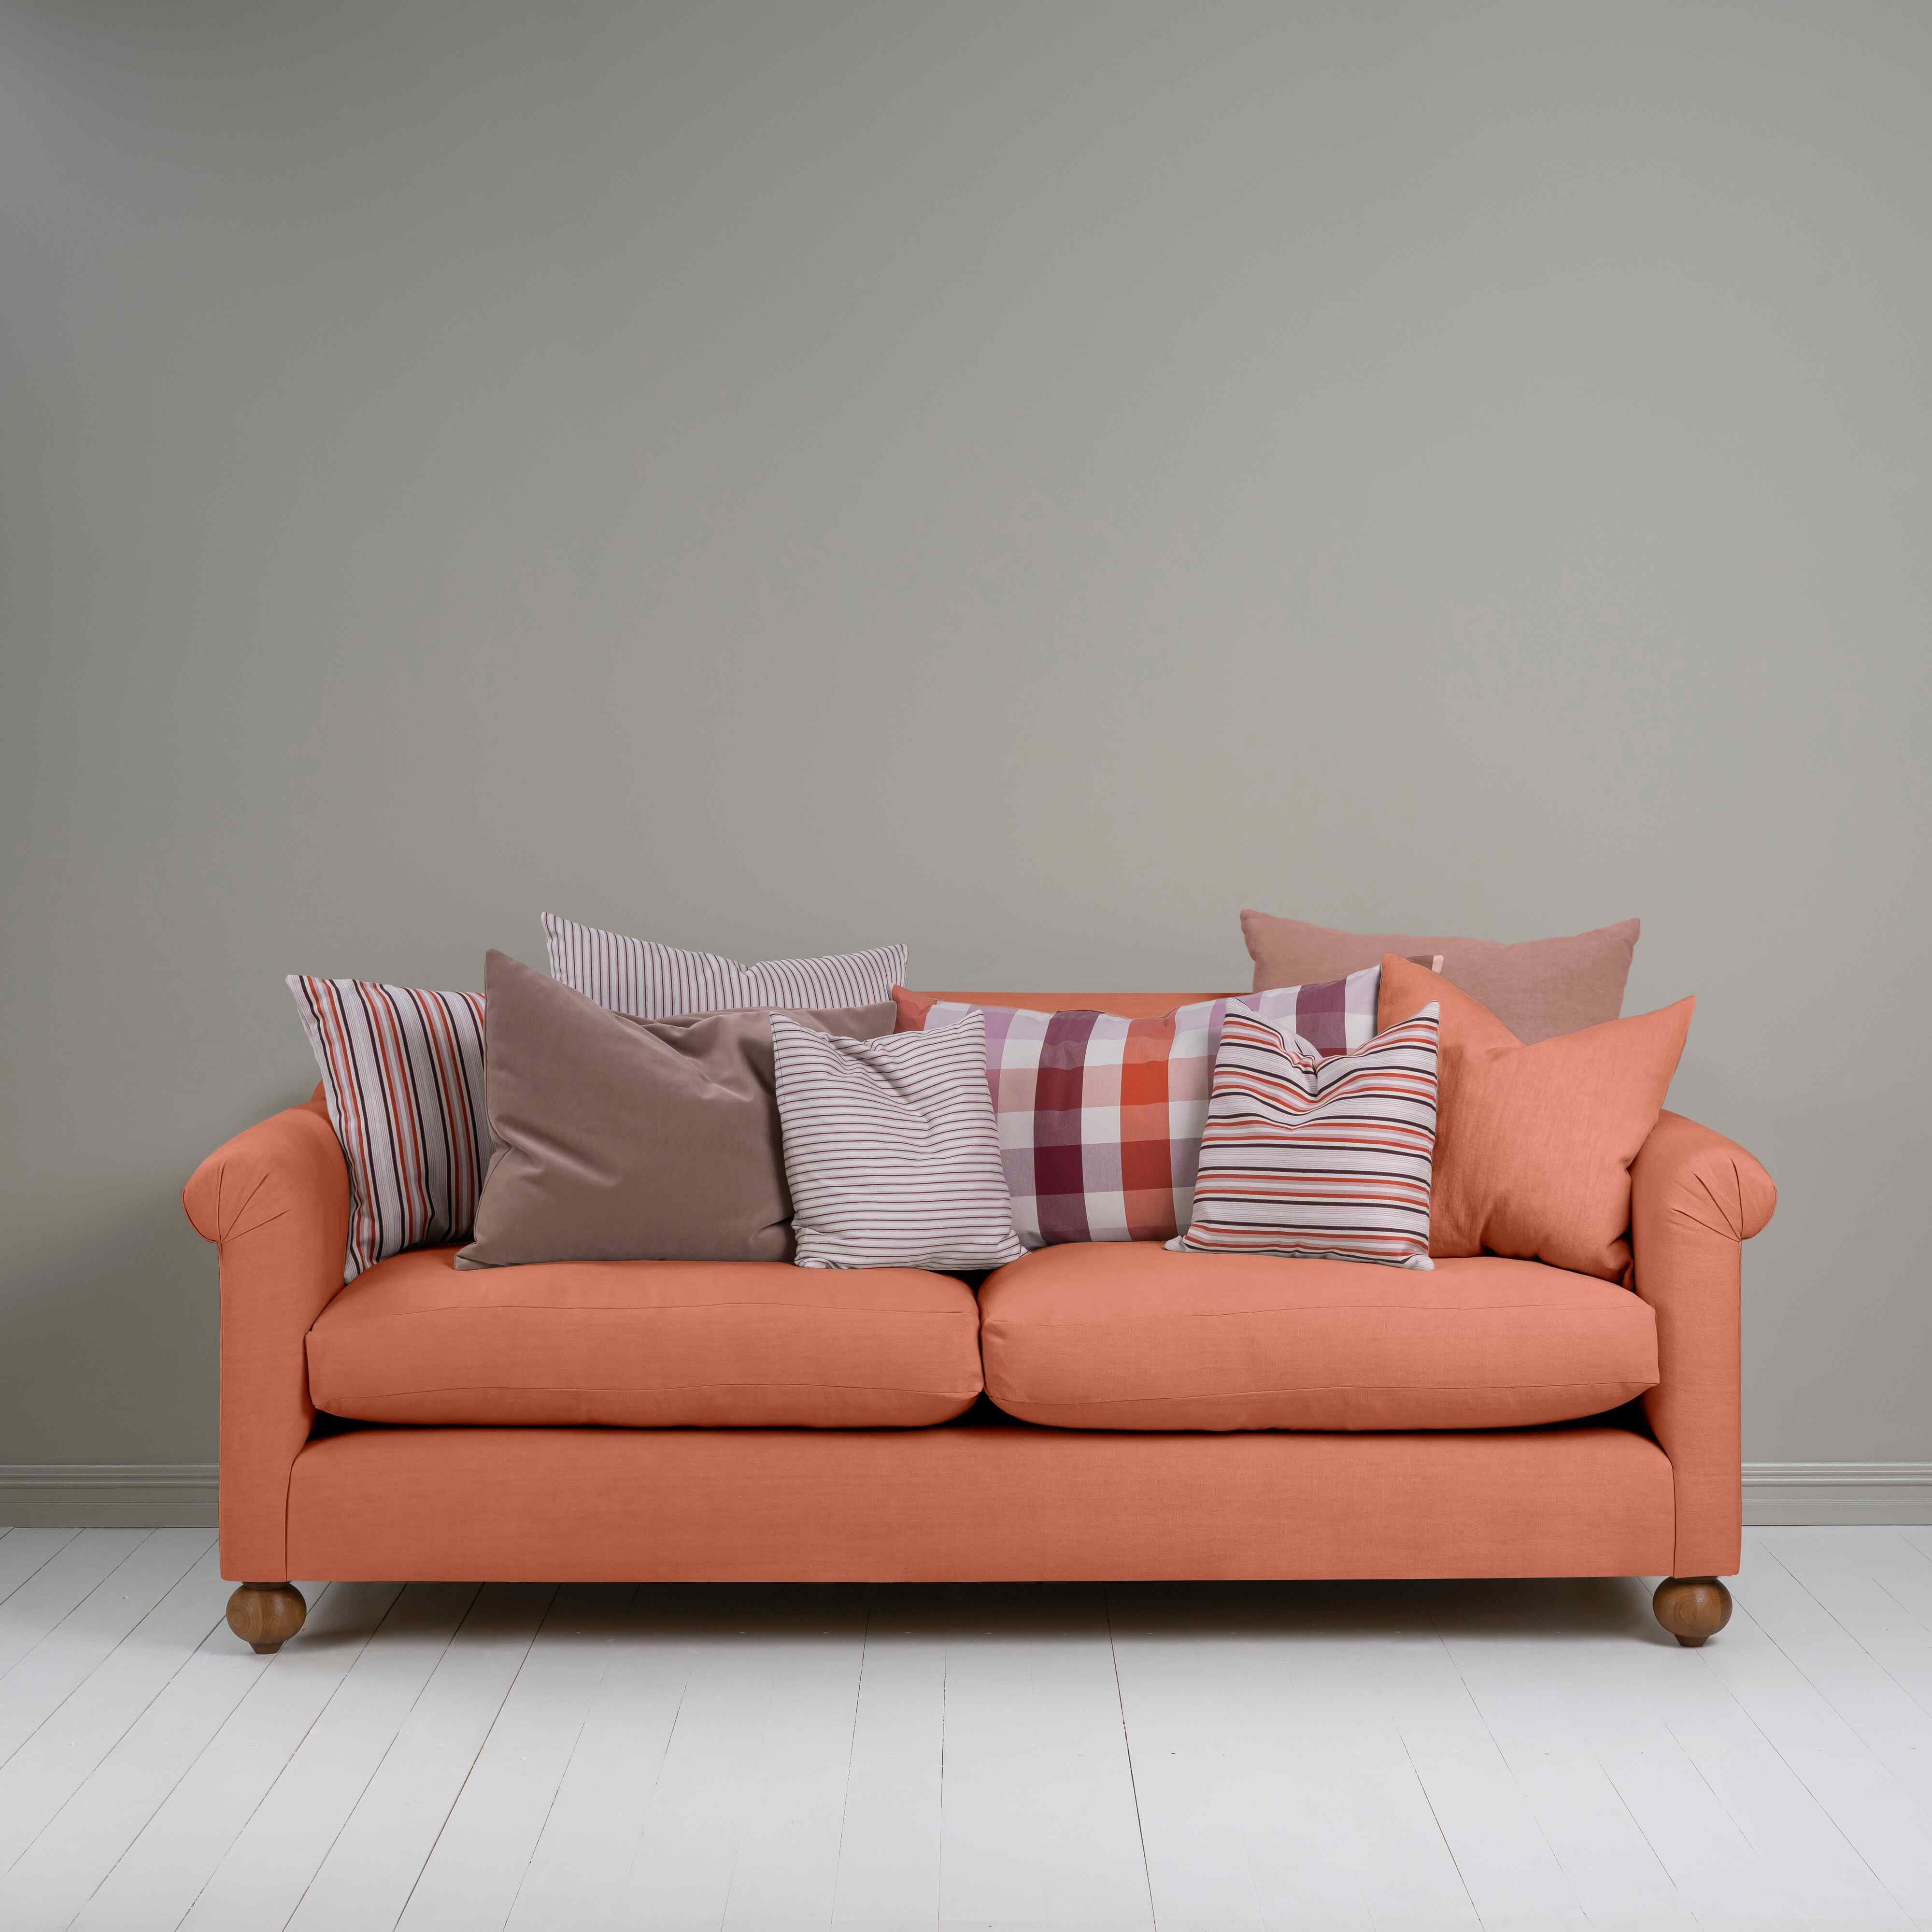  Dolittle 4 seater Sofa in Laidback Linen Cayenne 